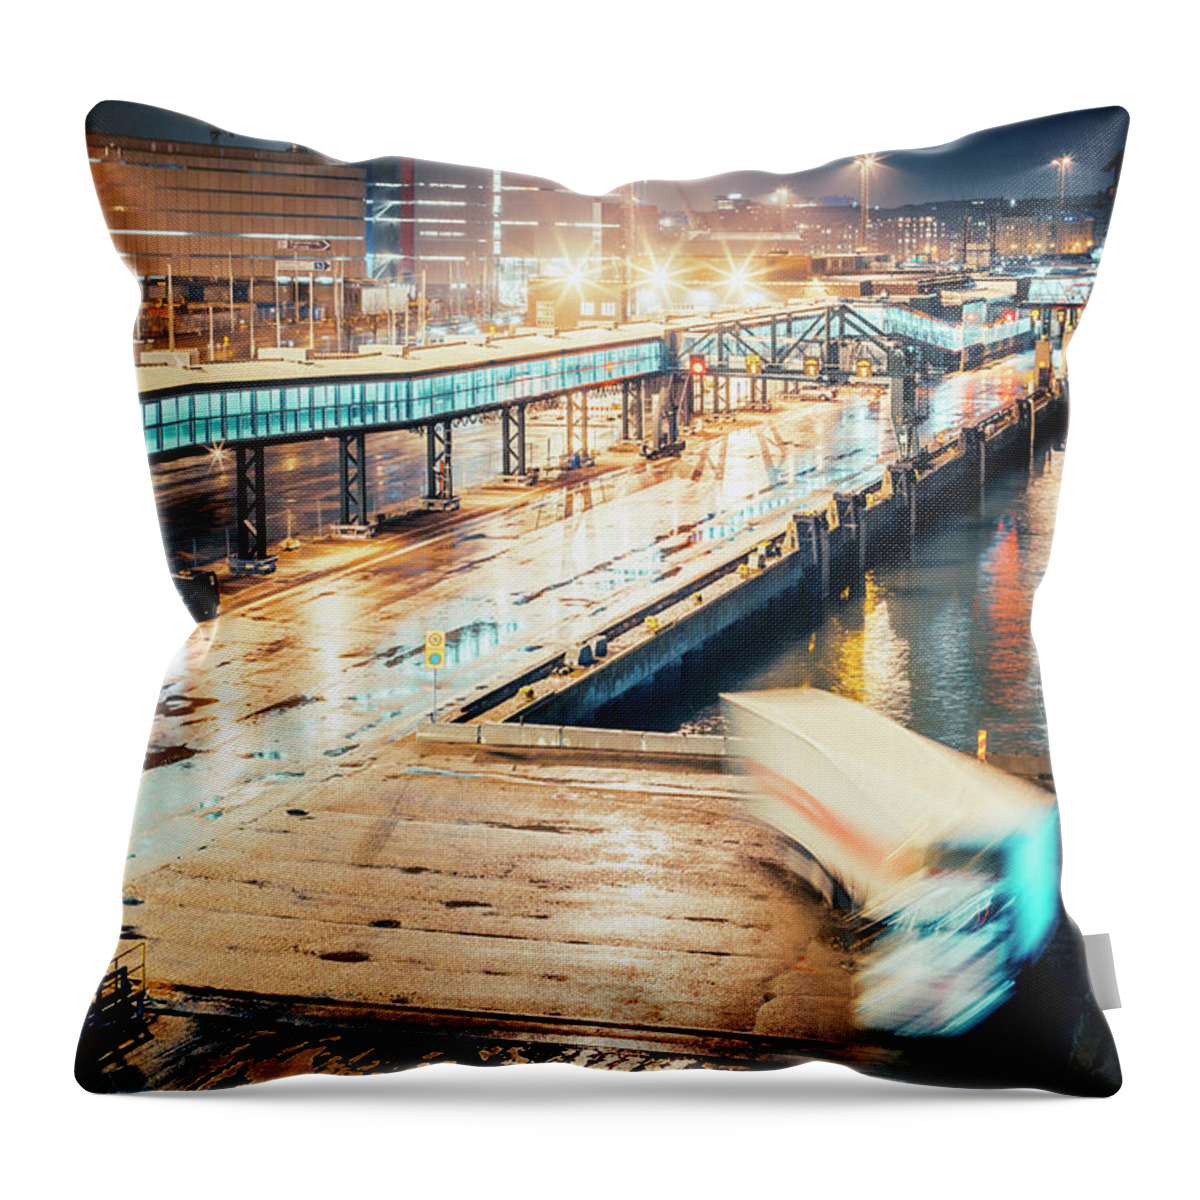 Industrial District Throw Pillow featuring the photograph Harbor Area by Peeterv